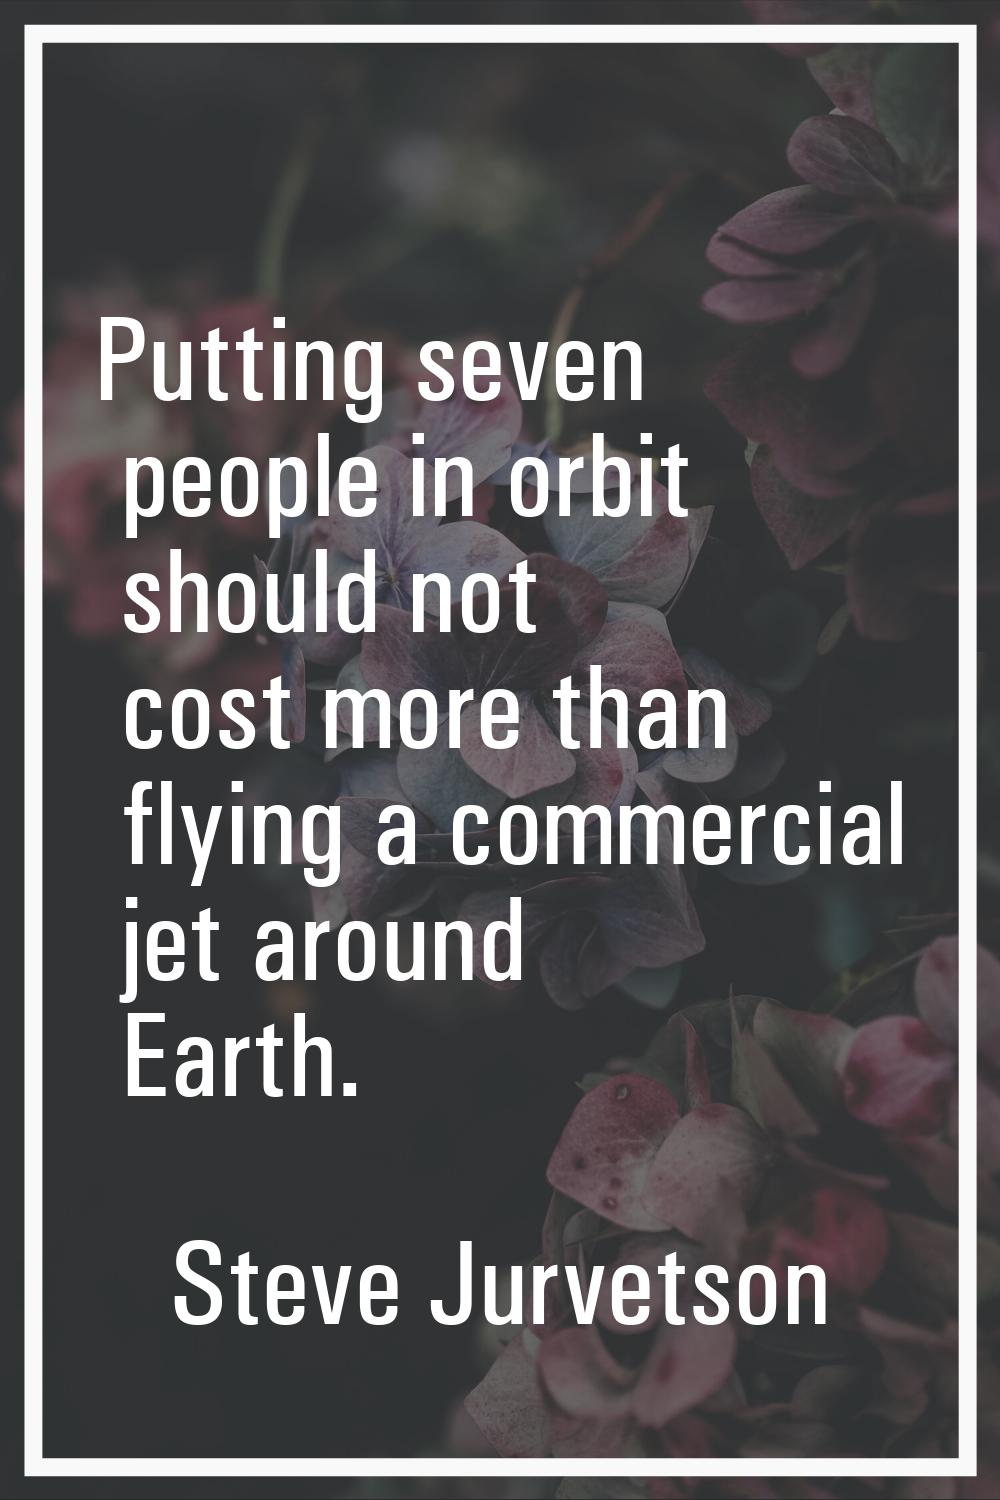 Putting seven people in orbit should not cost more than flying a commercial jet around Earth.